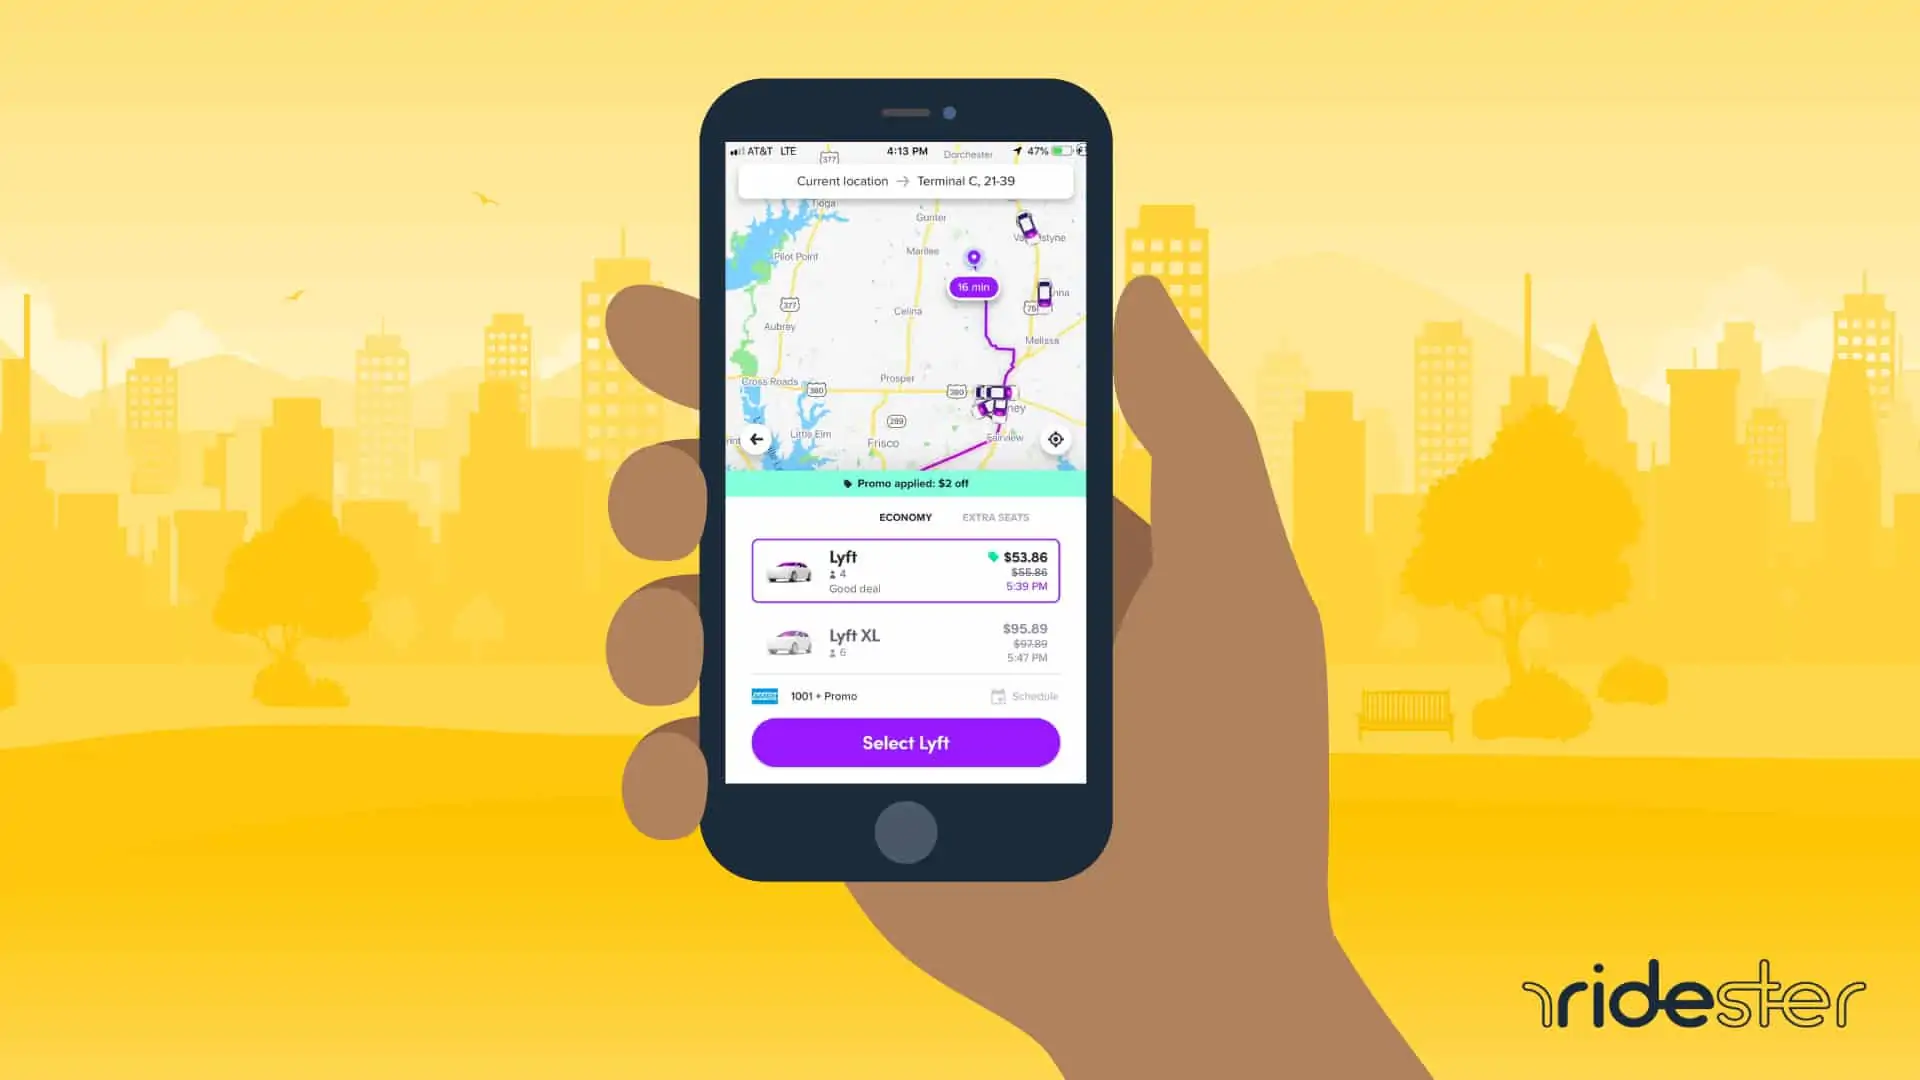 vector graphic showing hand holding phone and user in the process of schedule lyft rides